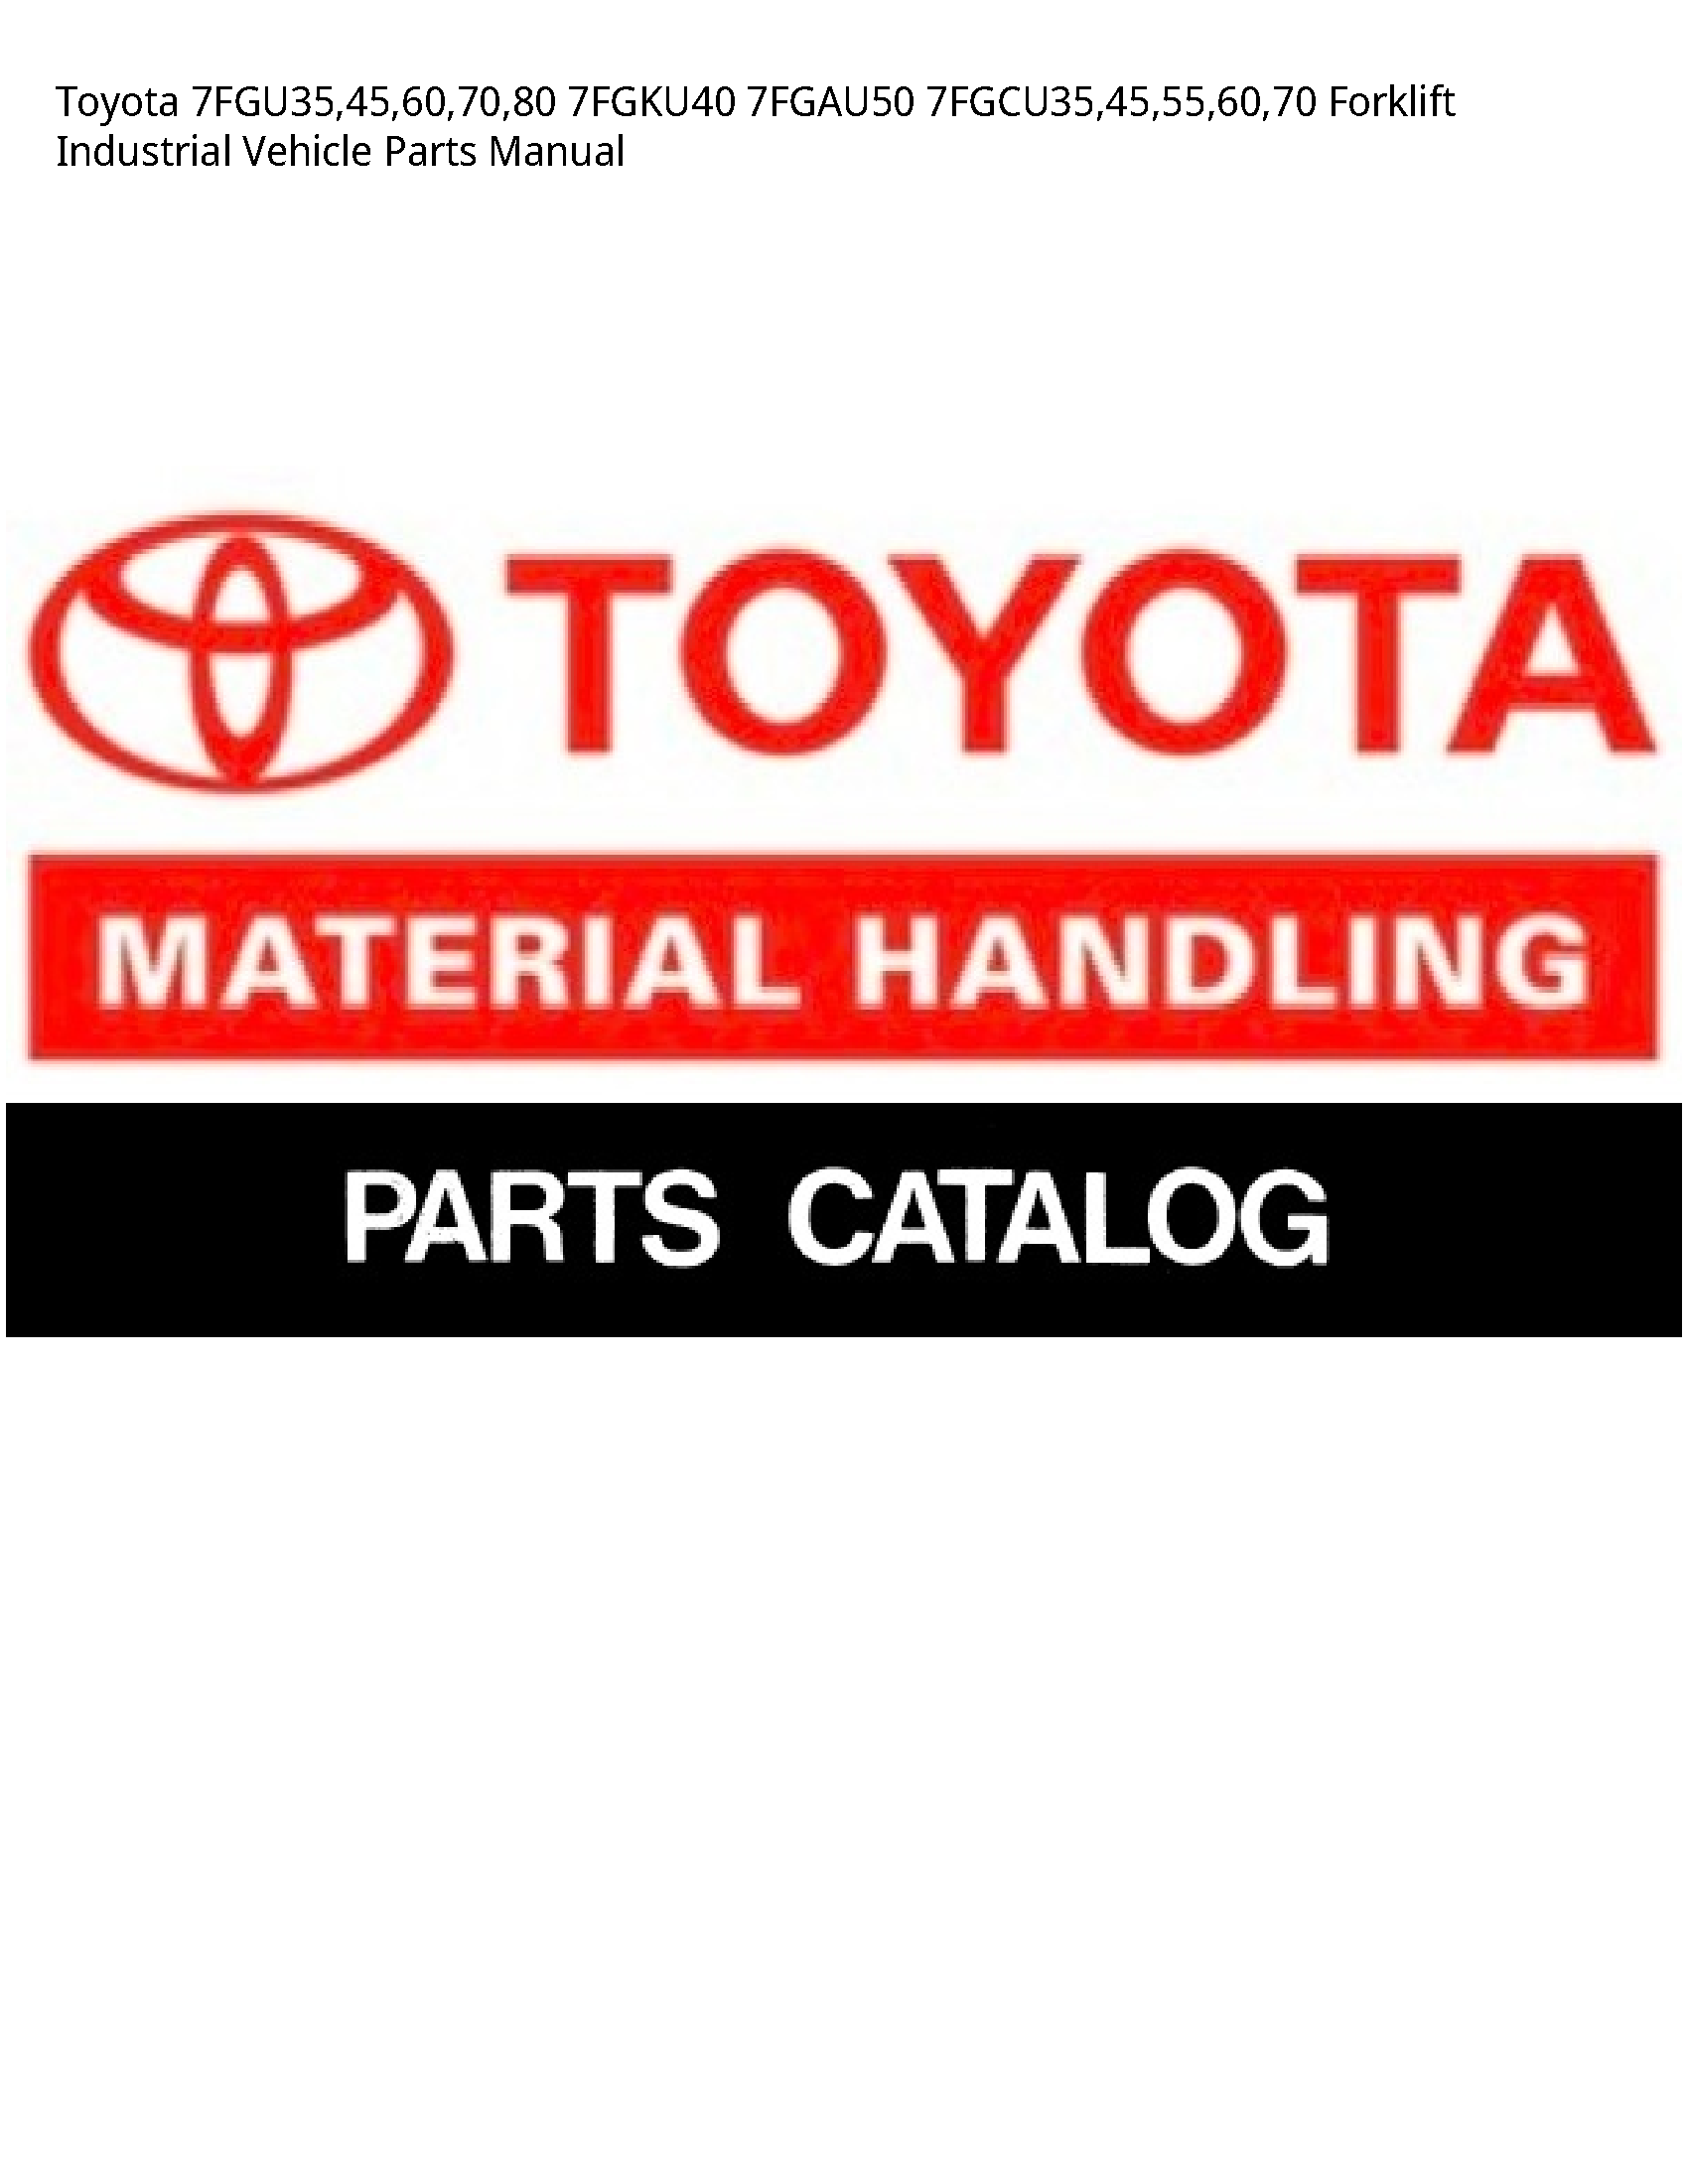 Toyota 7FGU35 Forklift Industrial Vehicle Parts manual